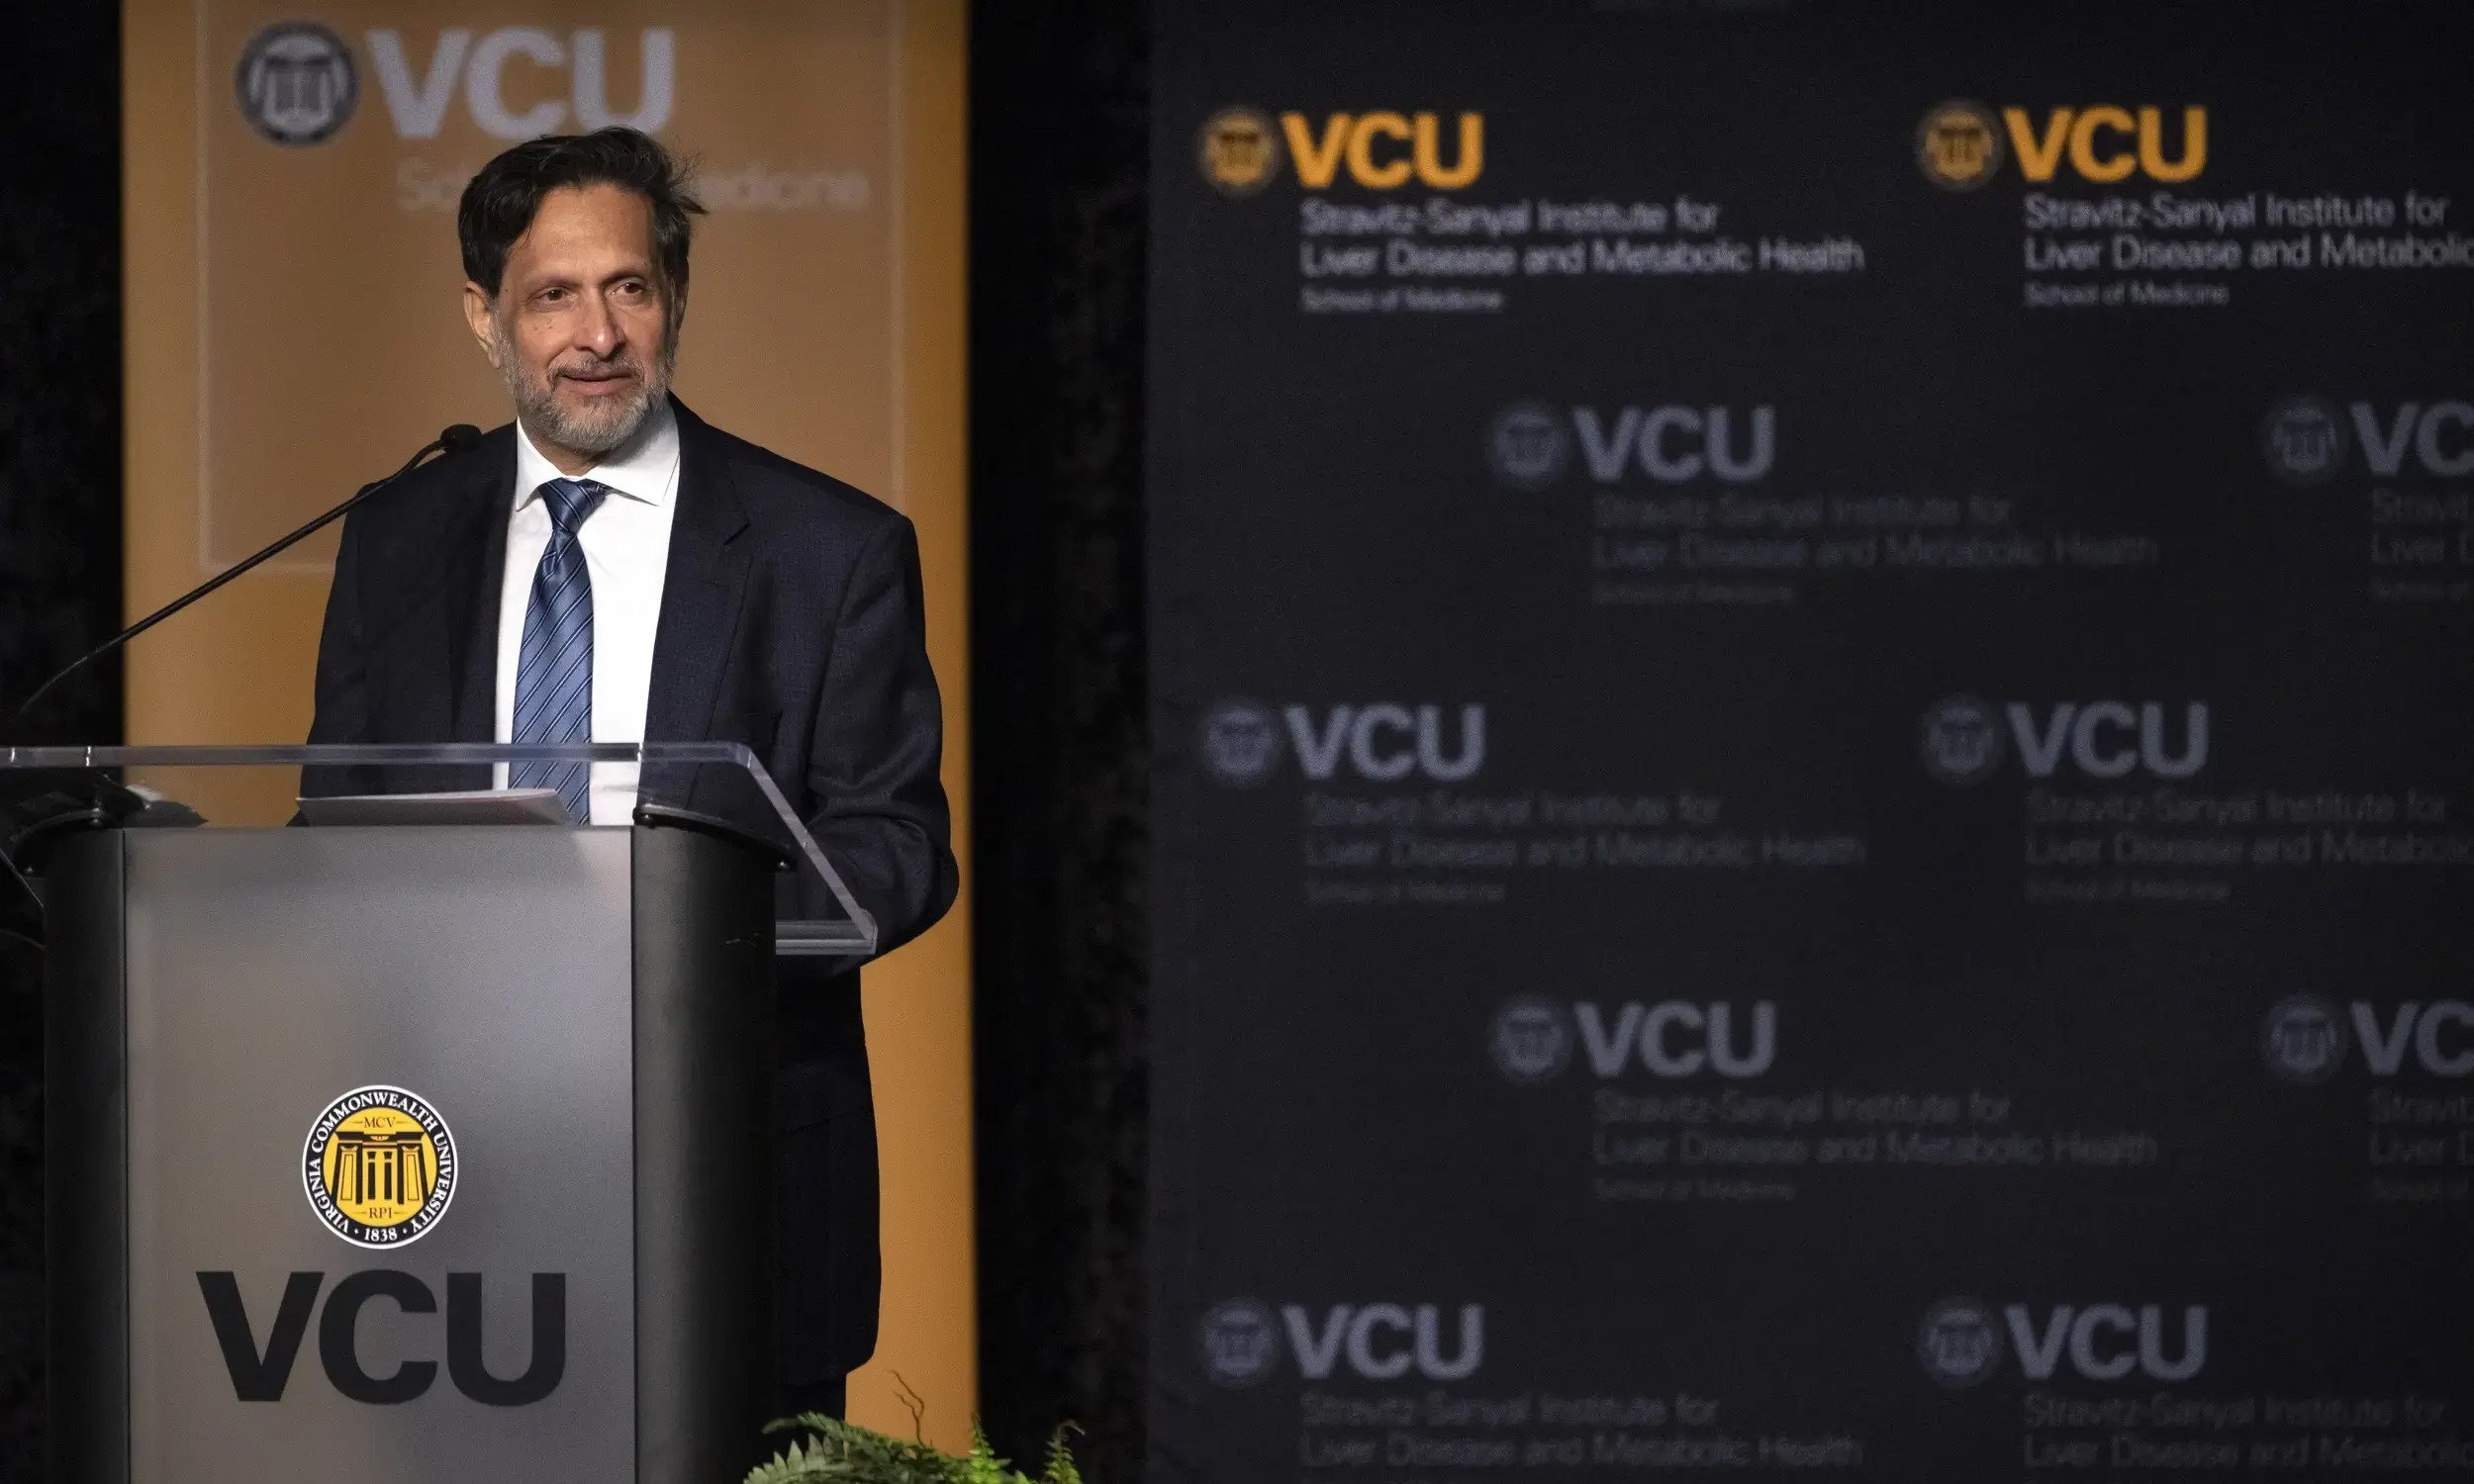 Inaugural symposium highlights liver research progress at VCU: An interview with Arun Sanyal